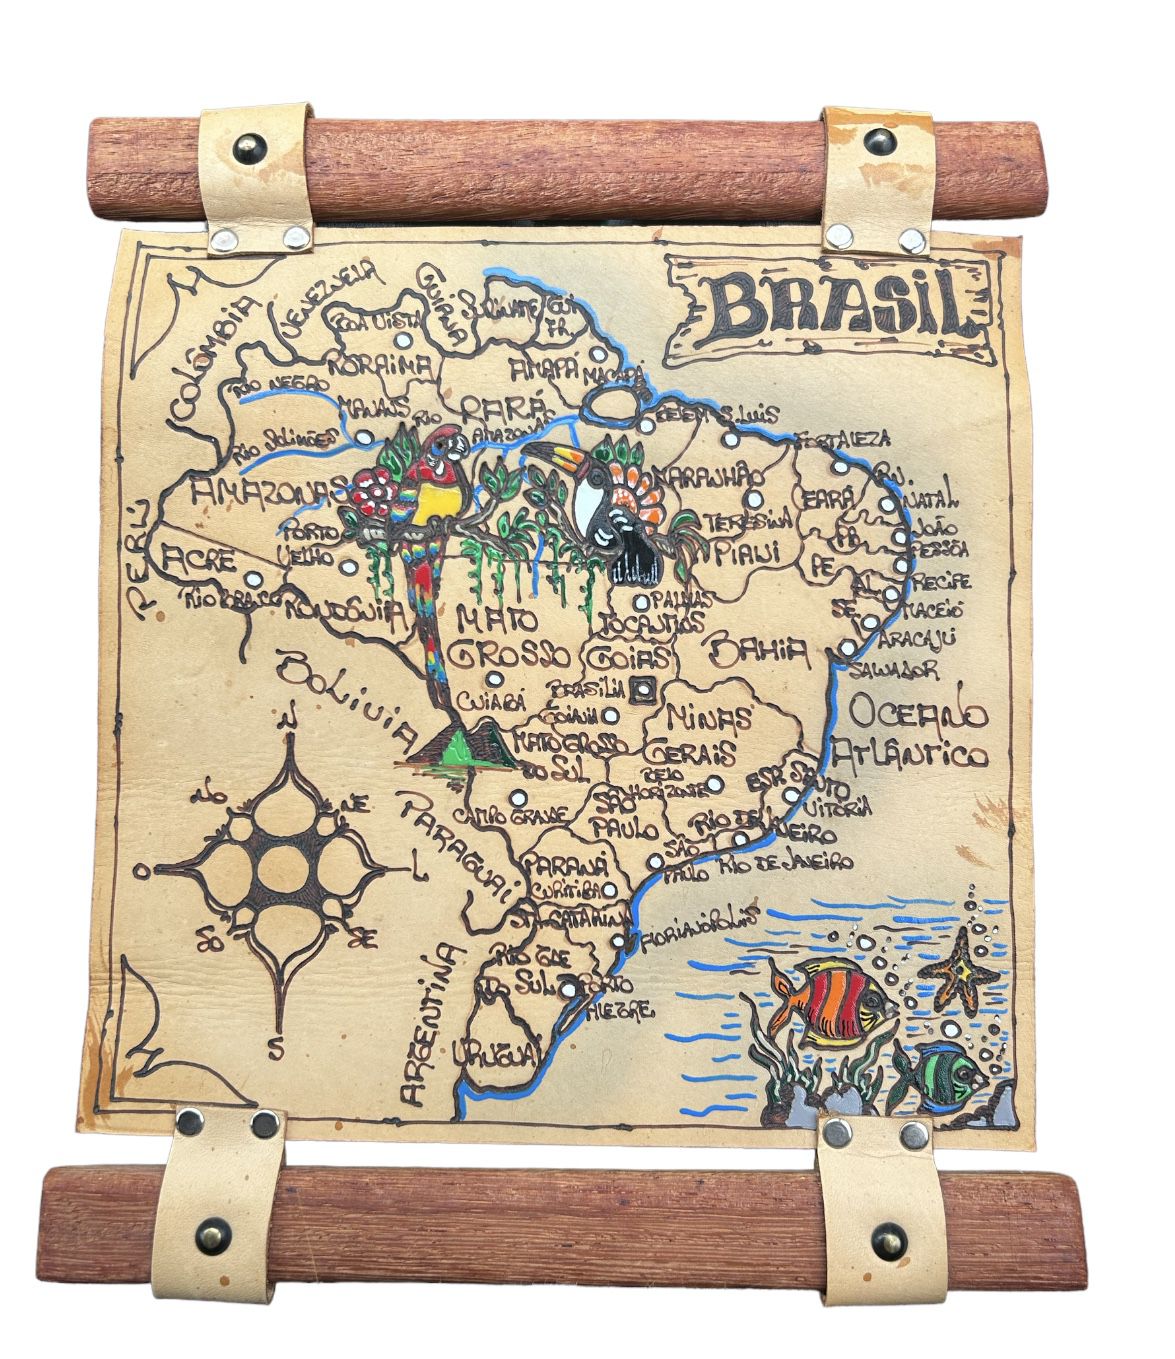 Brazil Leather Handmade Hand Painted Vintage Map